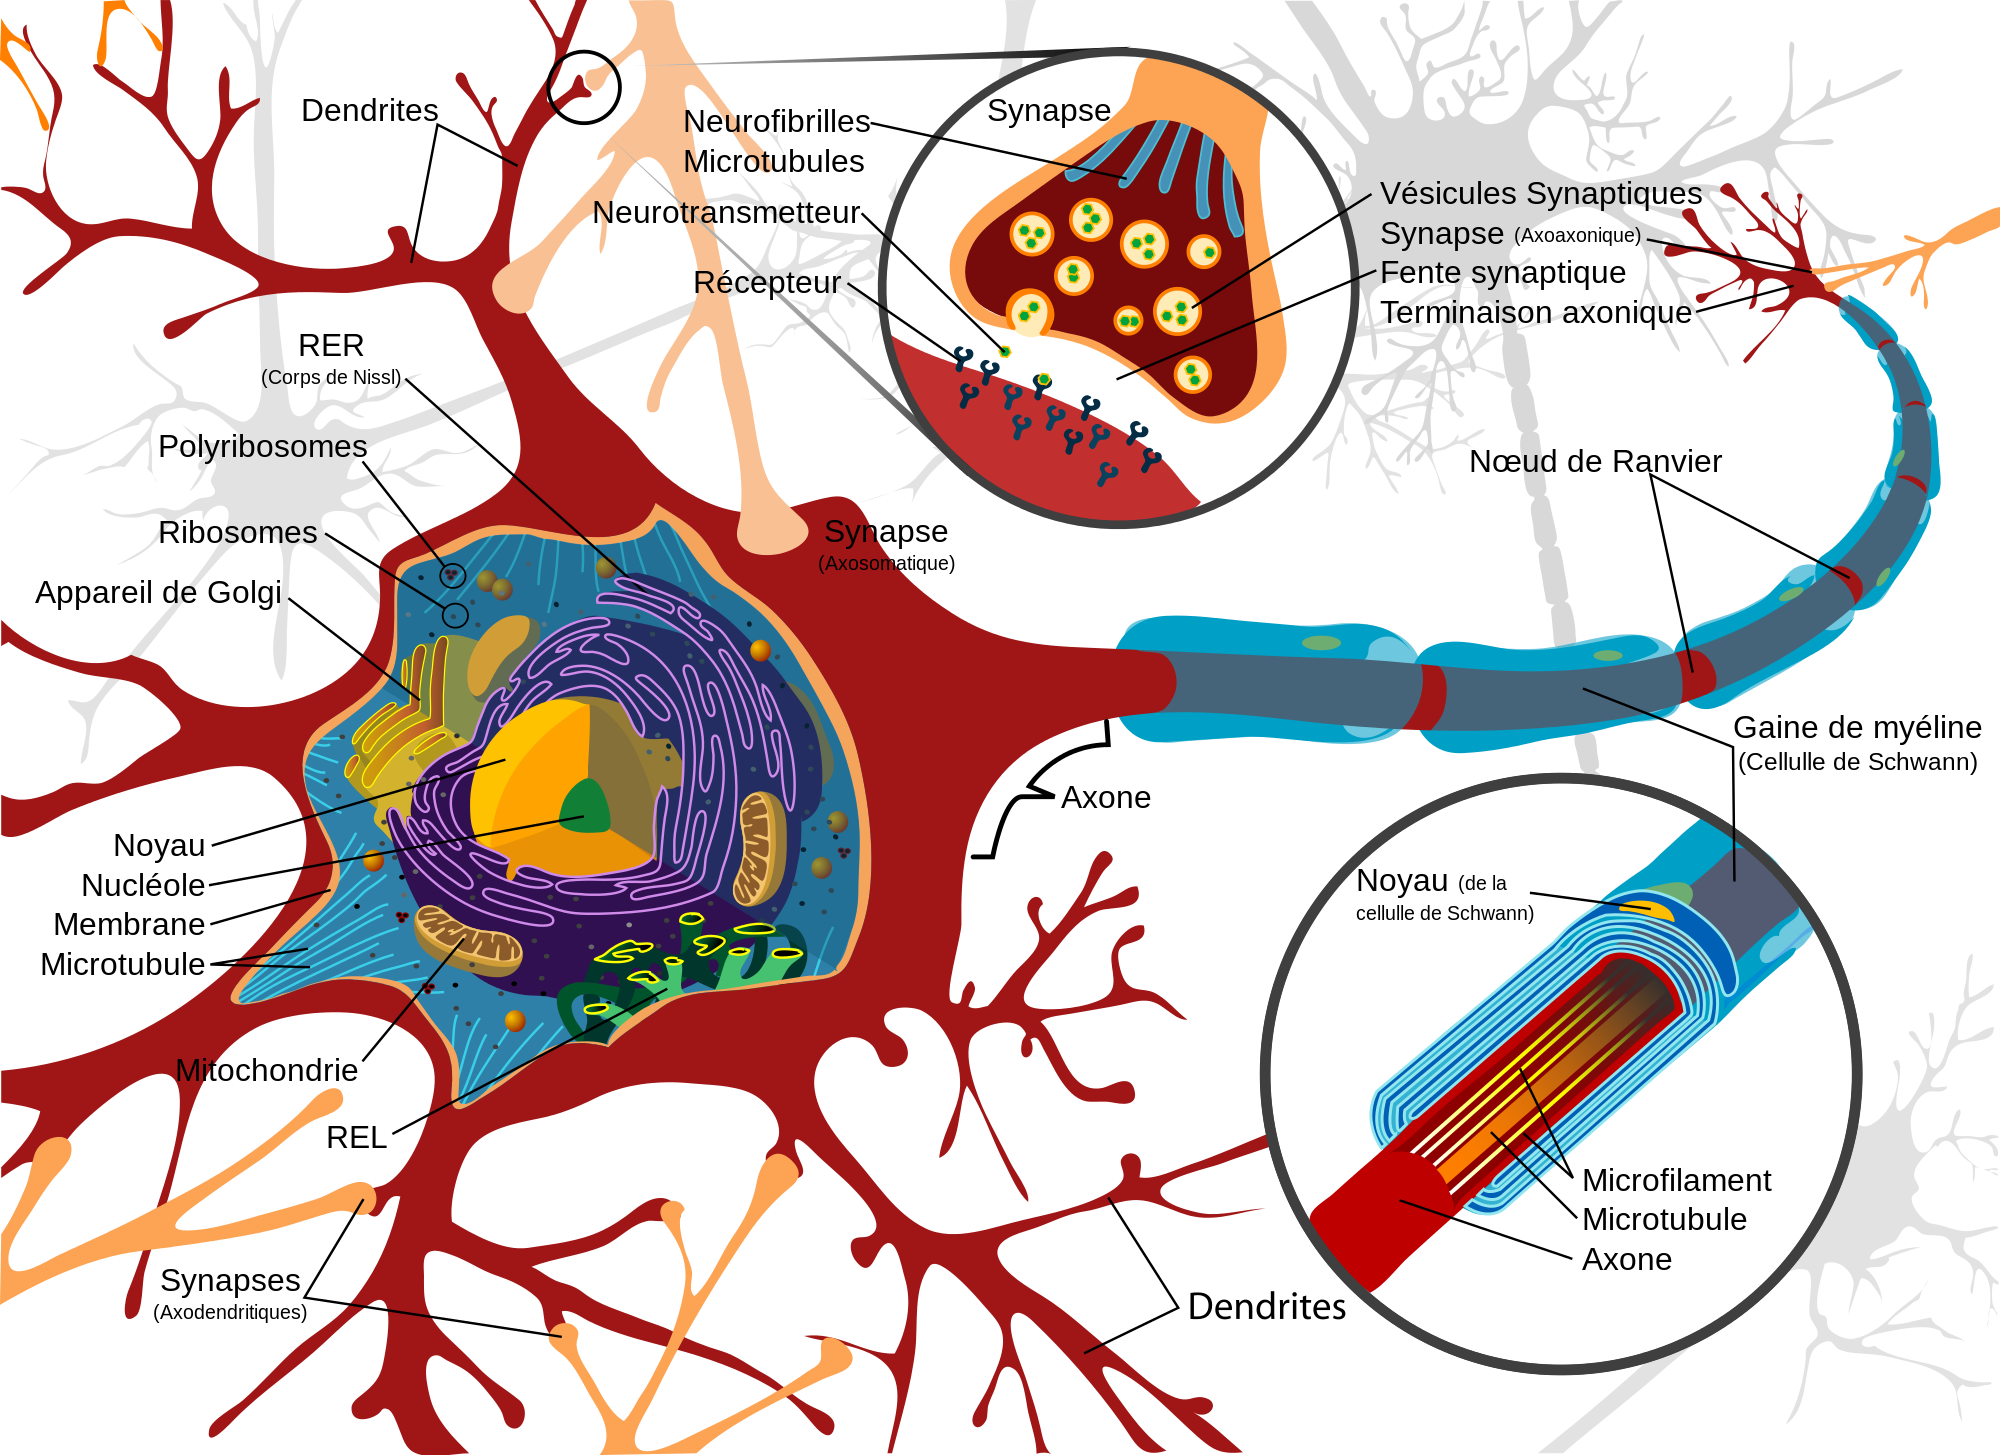 Source: https://commons.wikimedia.org/wiki/File:Complete_neuron_cell_diagram_fr.svg   This work has been released into the public domain by its author, LadyofHats. This applies worldwide. In some countries this may not be legally possible; if so: LadyofHa